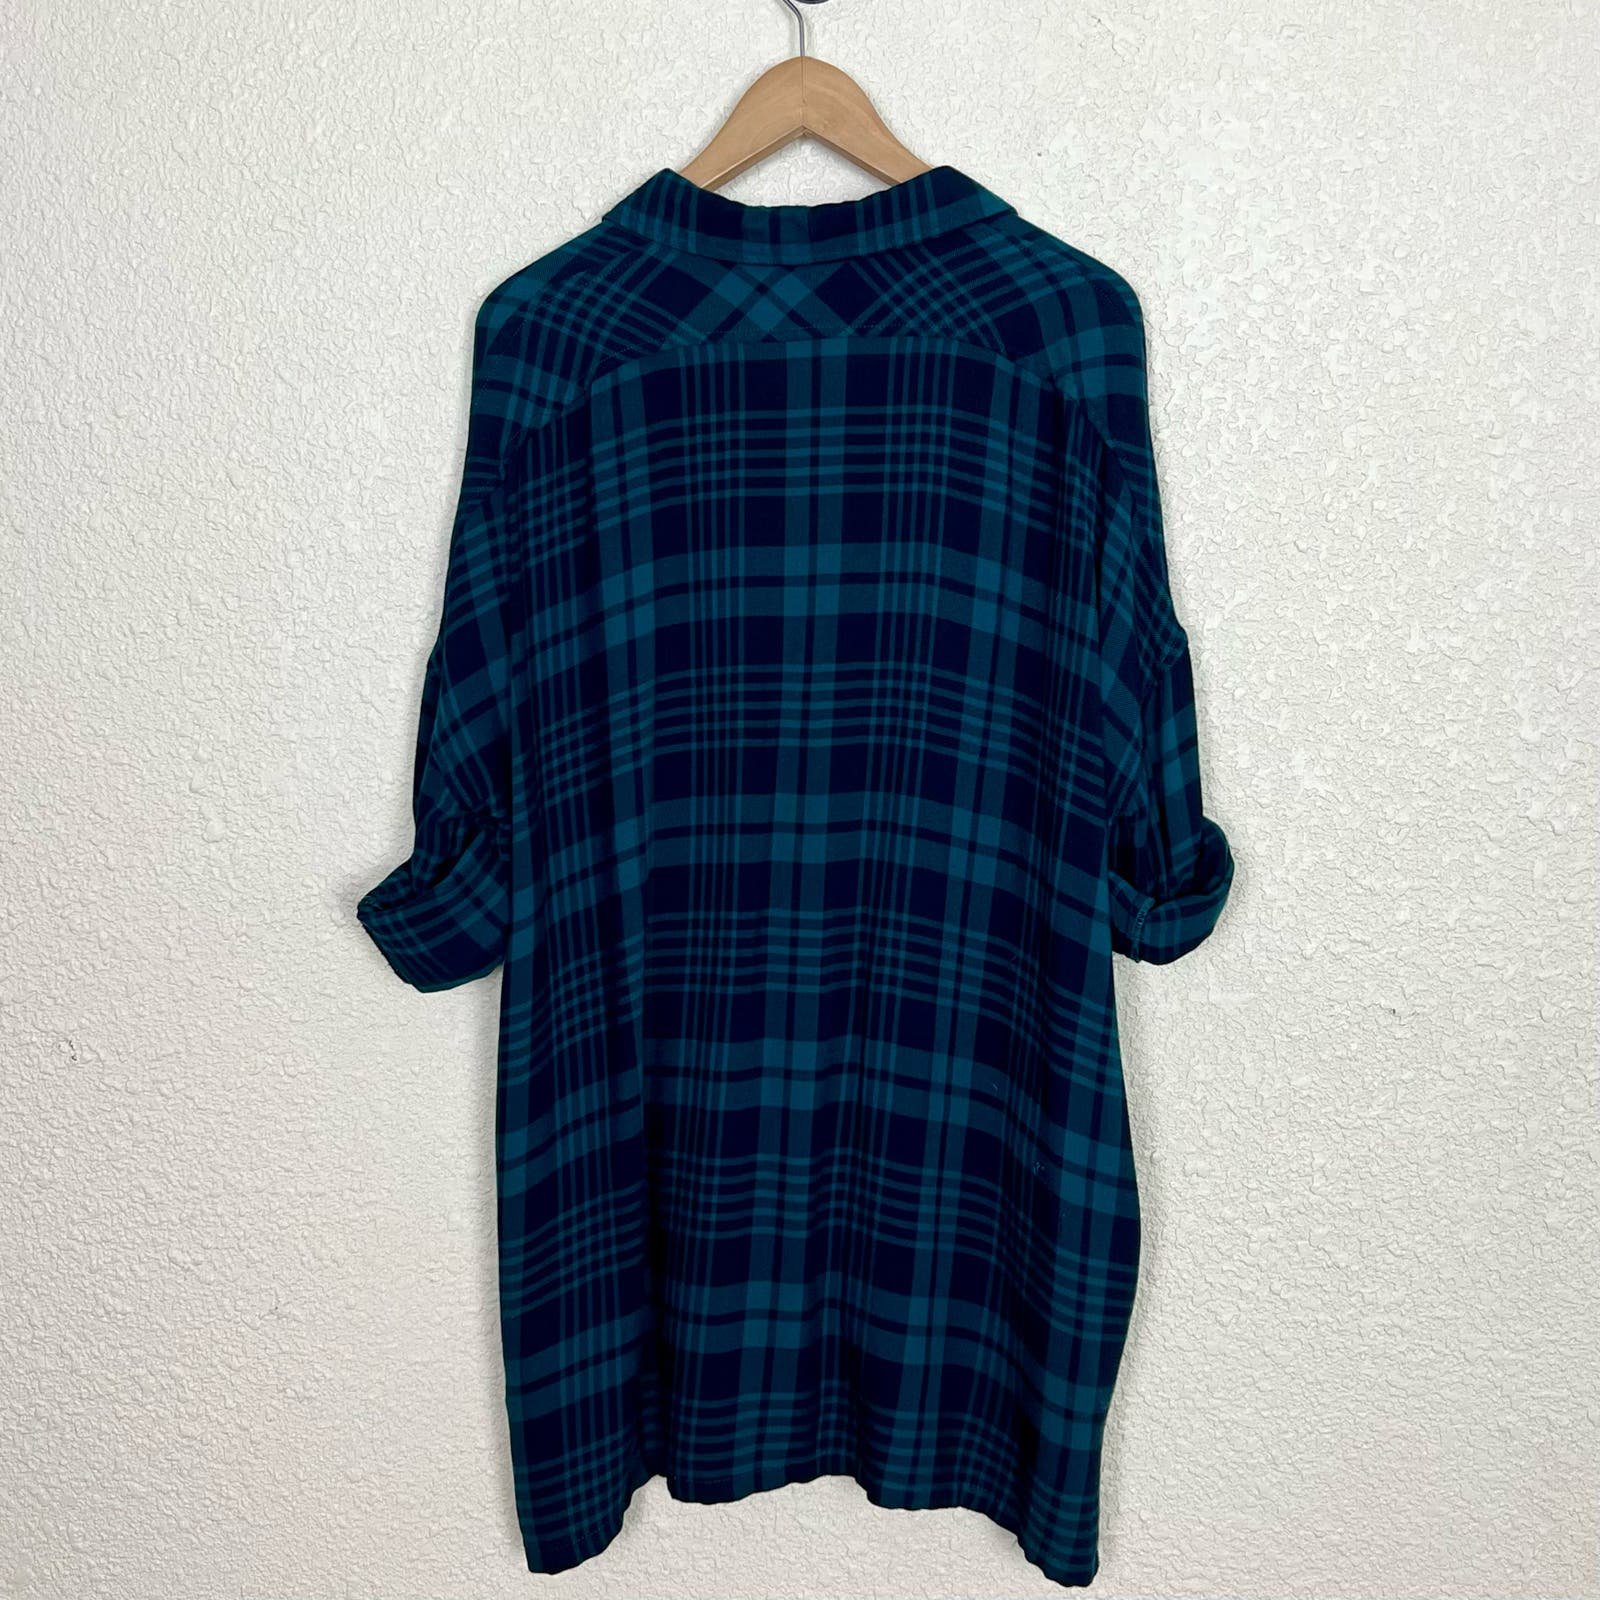 Elegant Entro Plaid Flannel Long Button Down Top Womens Small Green Black Pockets Tunic NZxeWPKQW online store